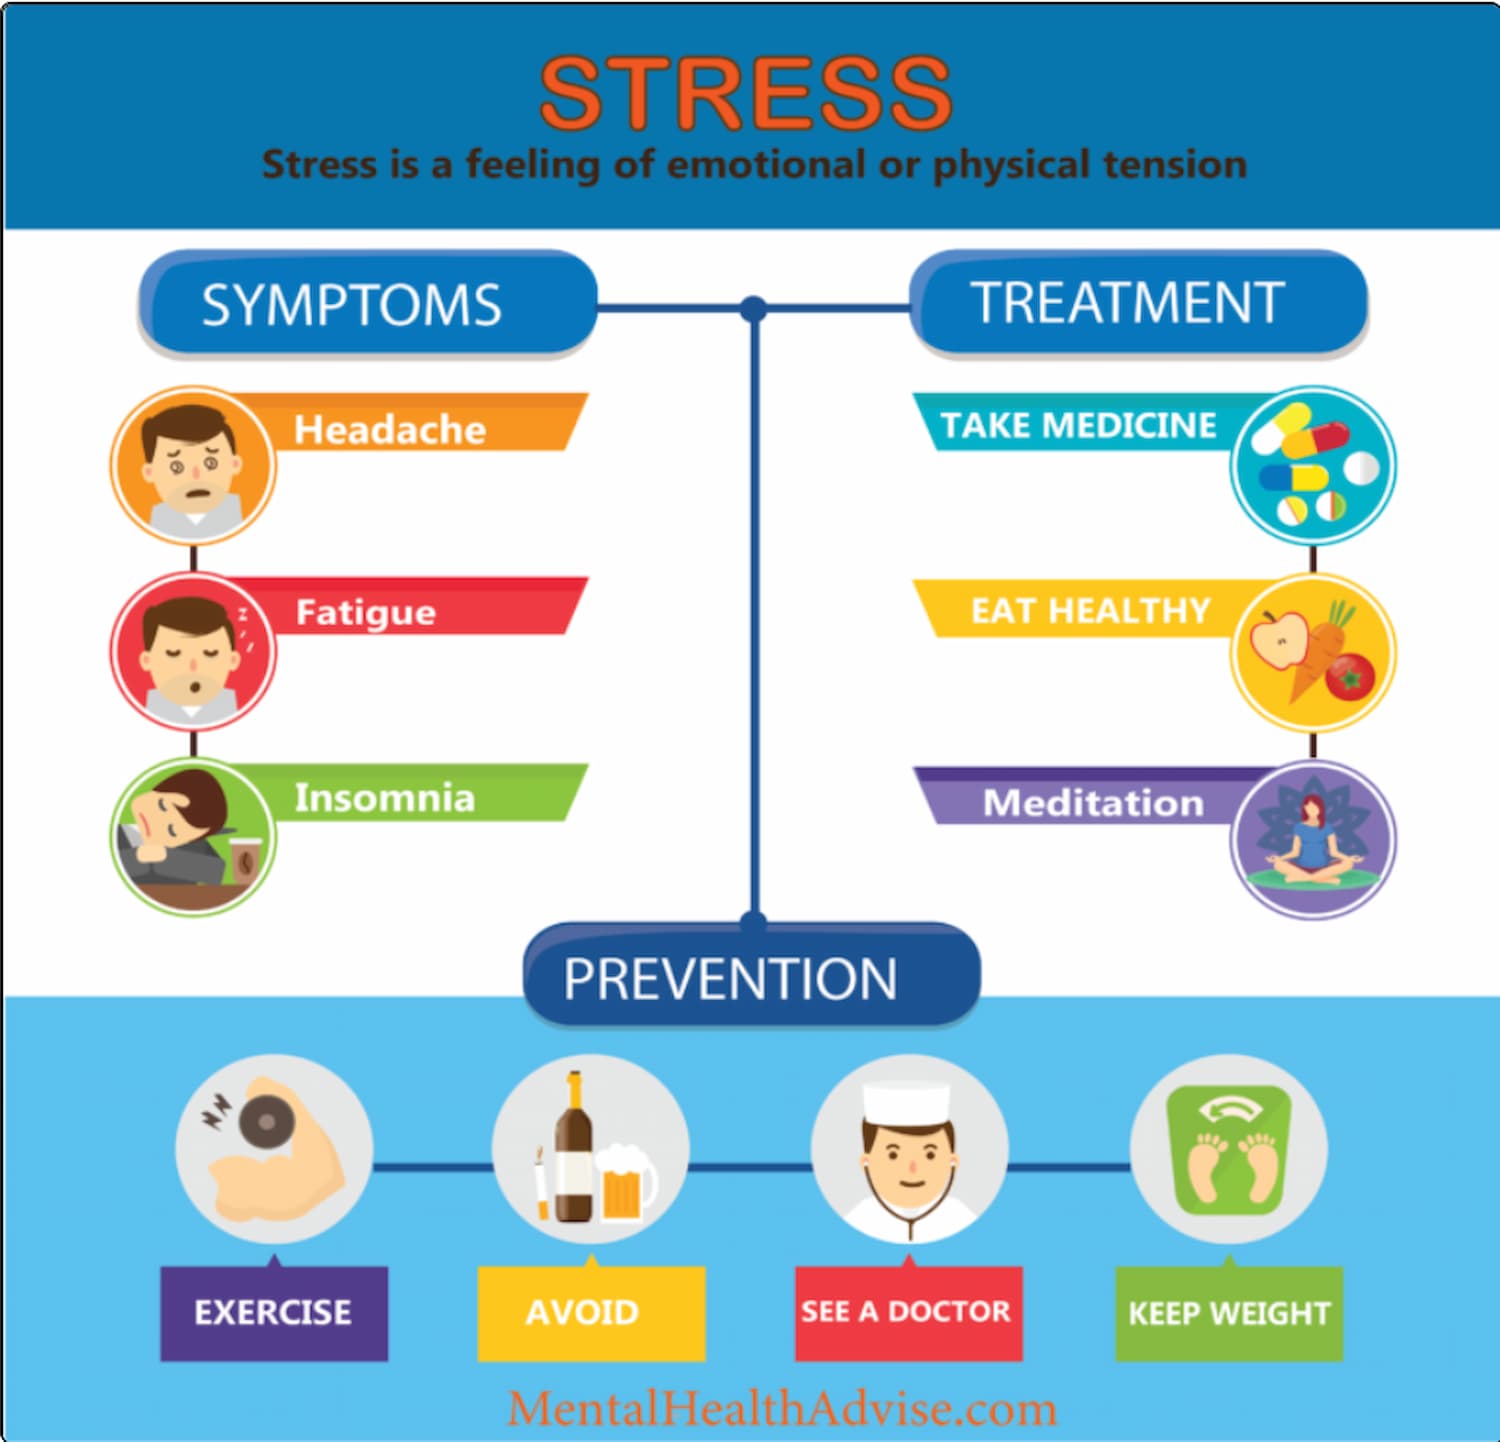 What are the signs of stress & the best way to treat or prevent them